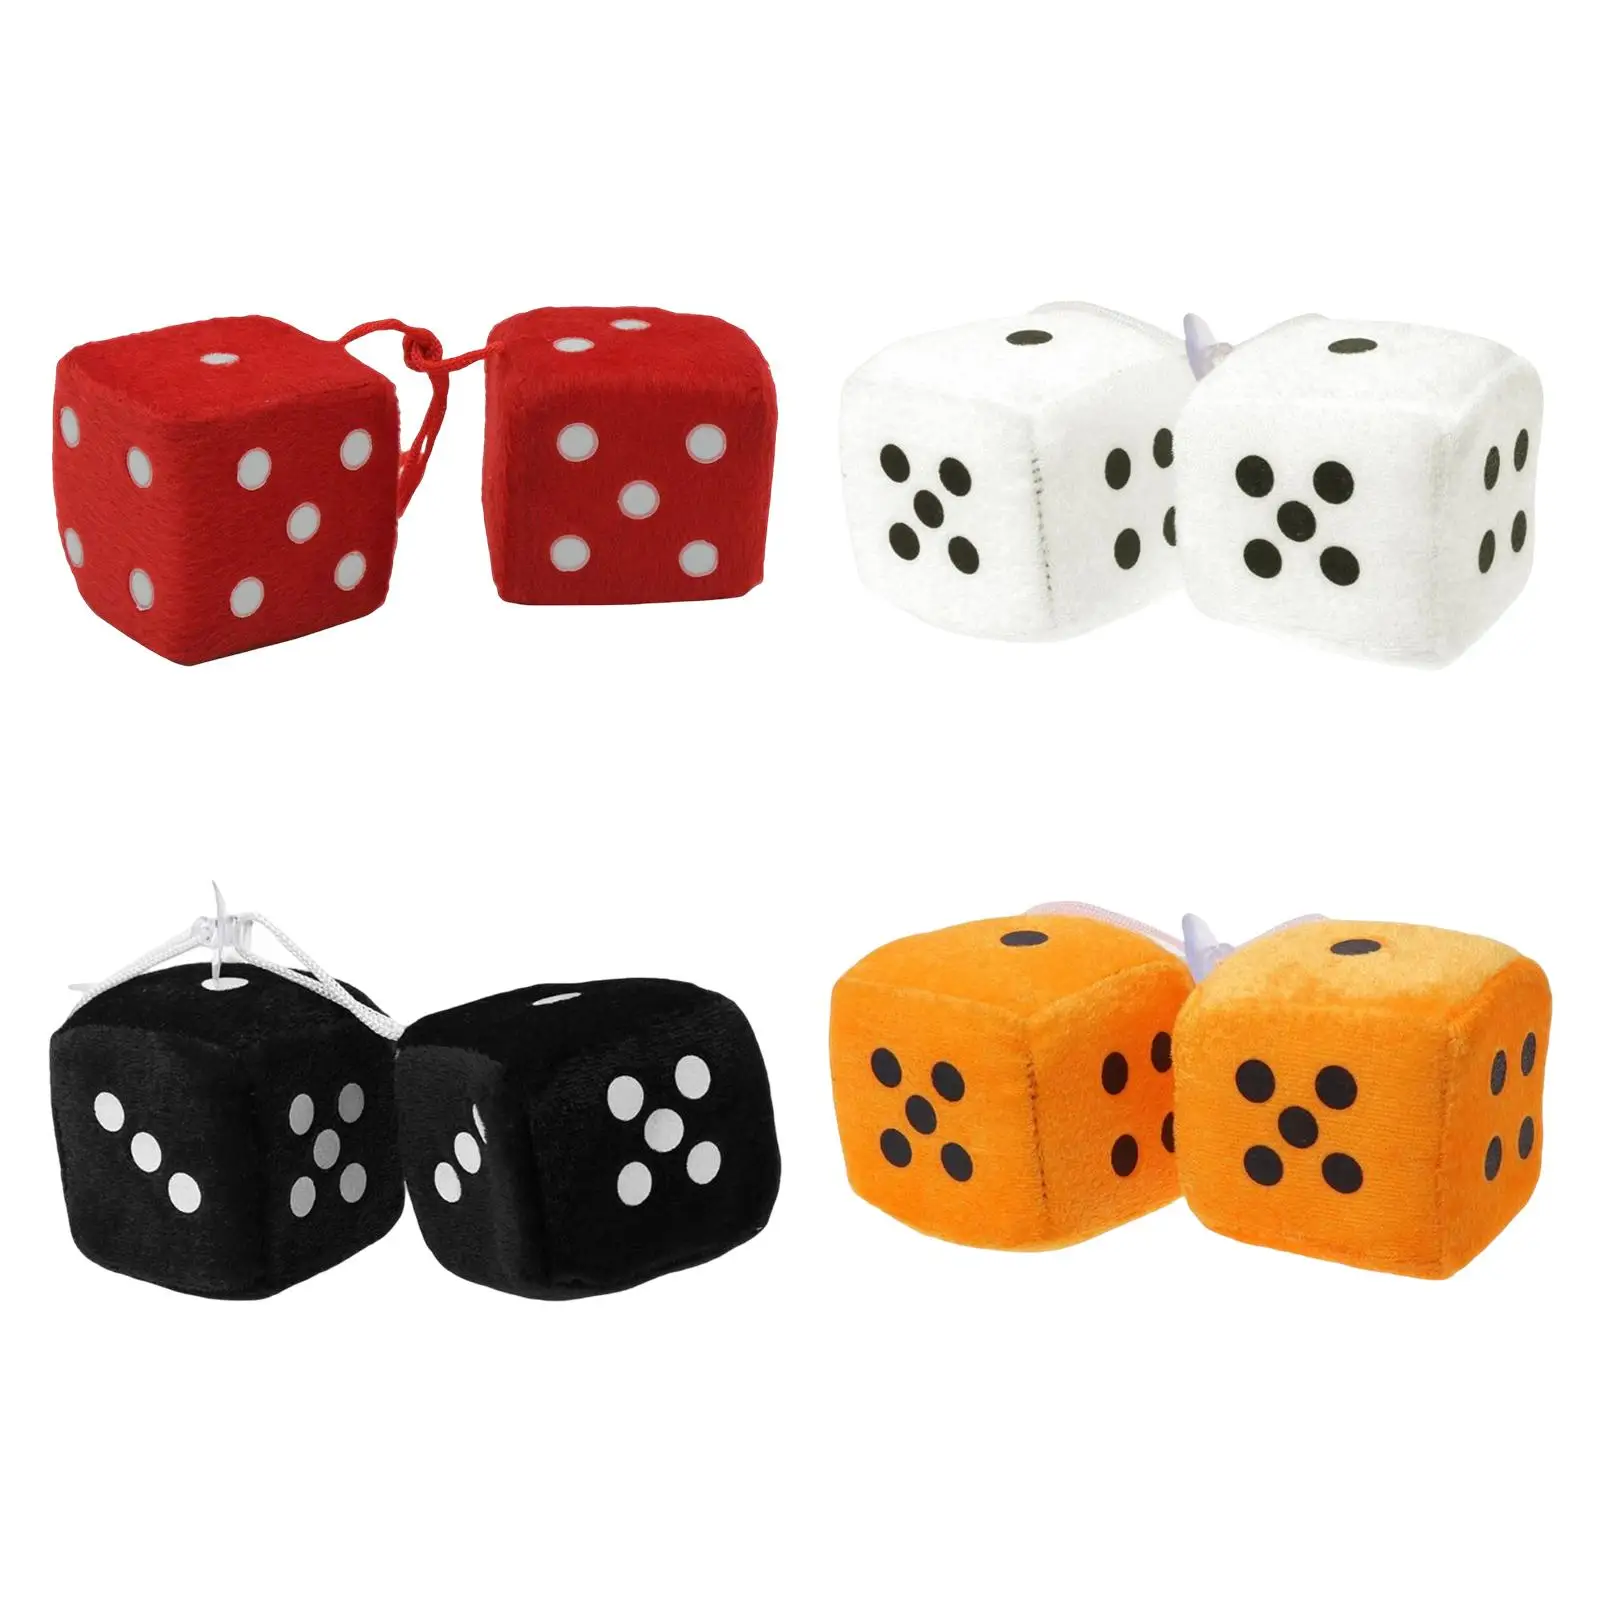 

Pack of 2-6 Pieces, Retro Fuzzy Dice with Dots, Plush Dice, Ornament